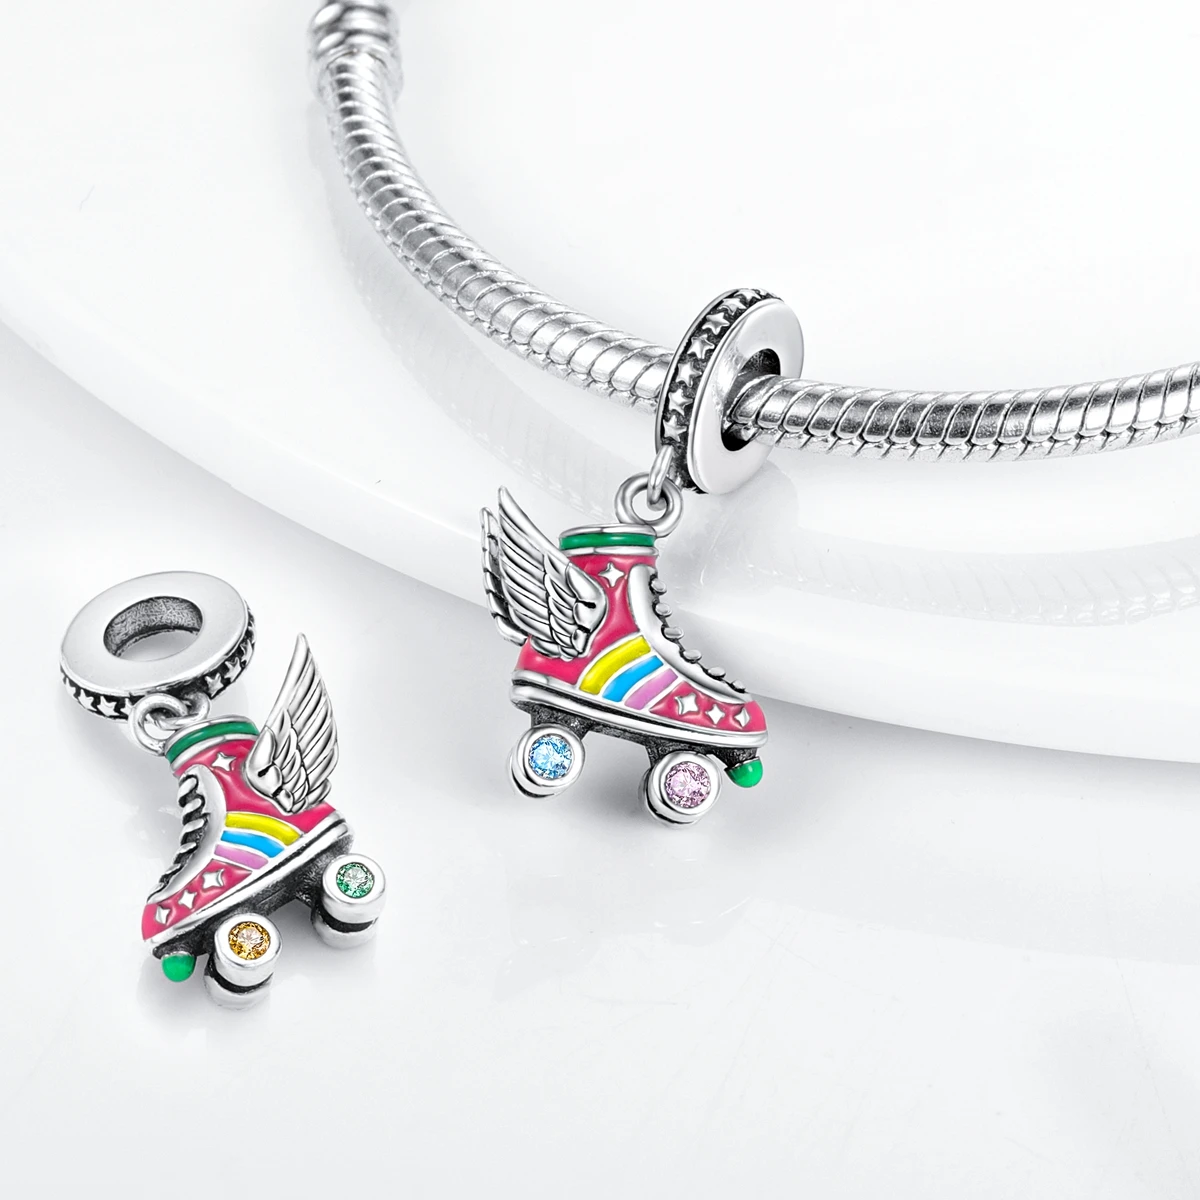 Silver Plated Chameleon Charms Bead Colorful Sketchpad Dangle Zirconium Clip Pandora Bracelet Necklace DIY Jewelry Marking